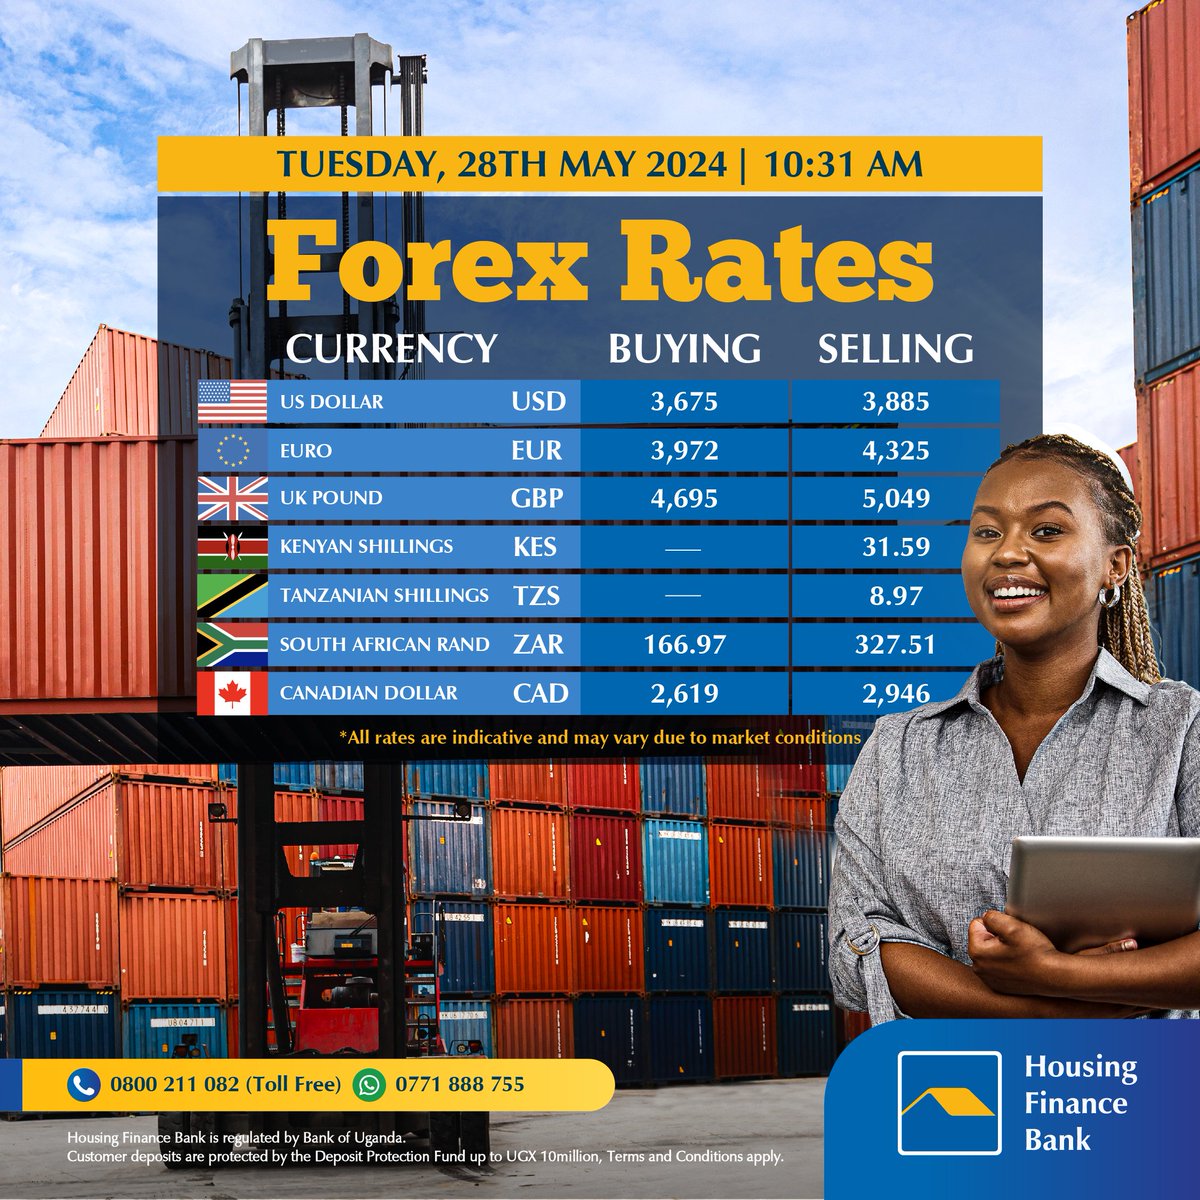 Stay updated on Forex rates with #HFBForexExchangeRates. Visit any of our branches and transact easily. Forex rates may differ due to changes in market conditions. #WeMakeItEasy